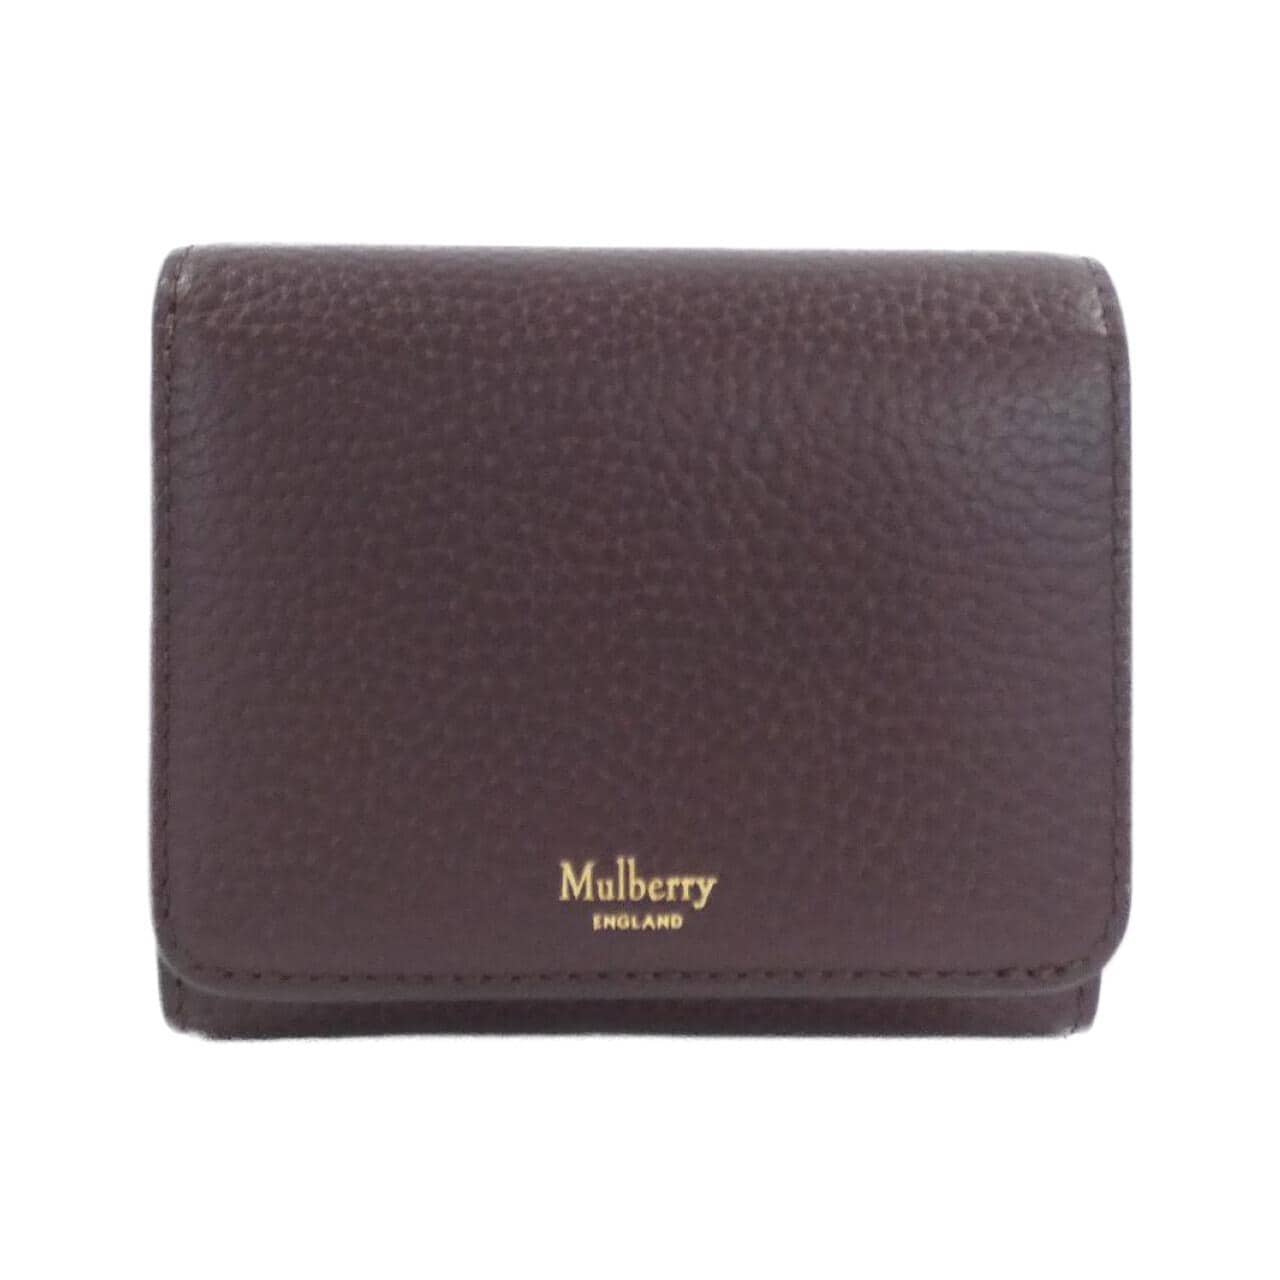 [BRAND NEW] Mulberry RL5074 346 Wallet